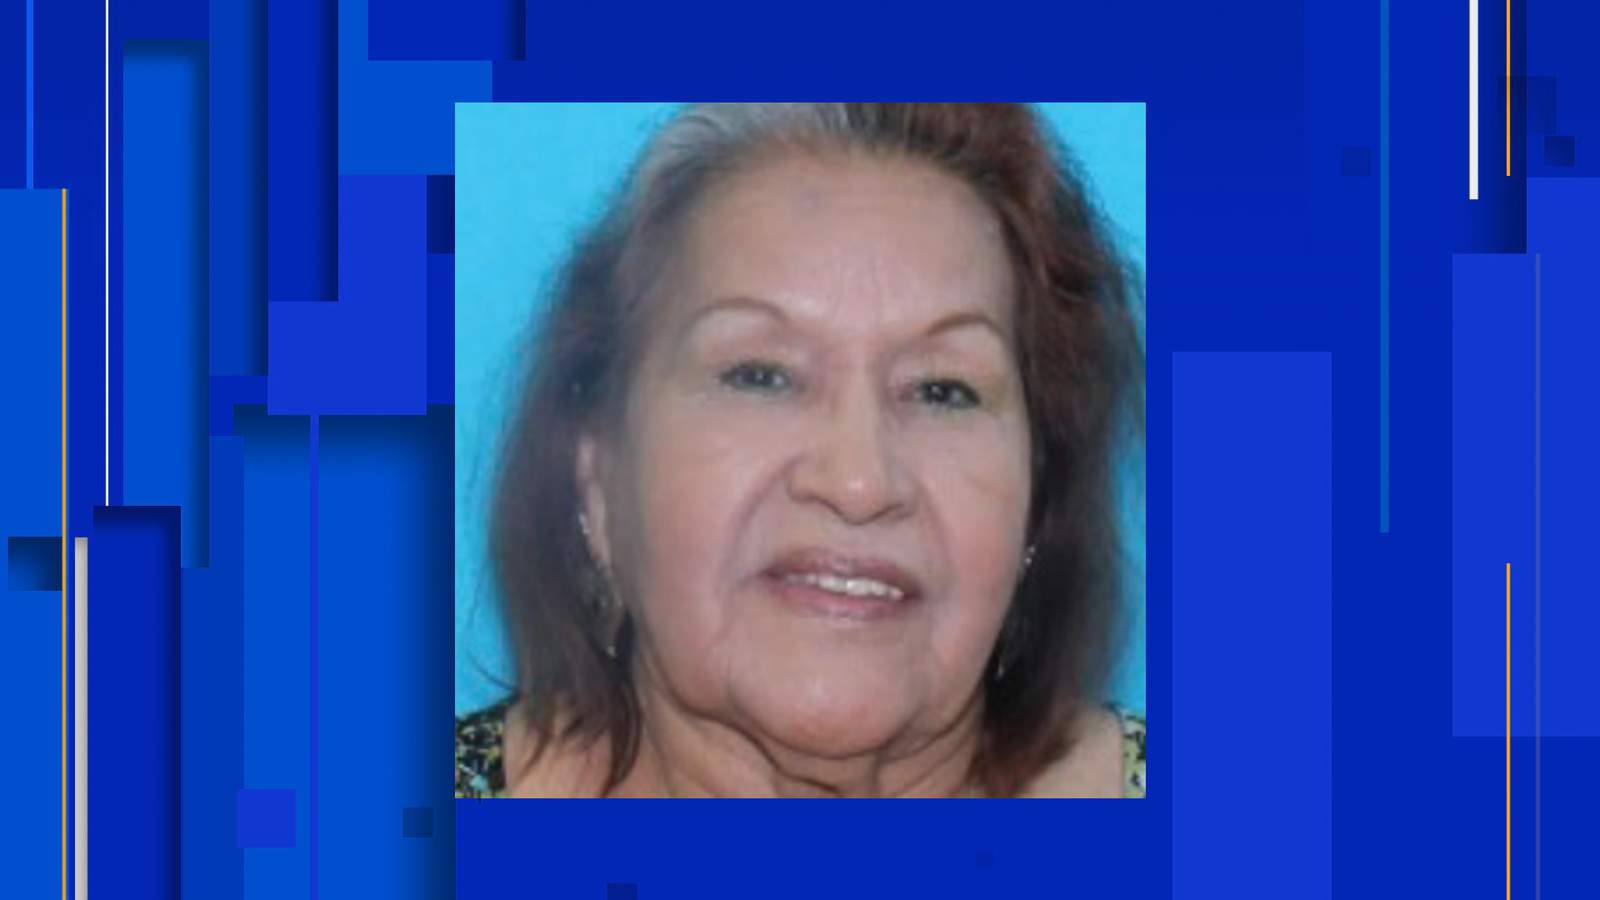 80-year-old woman found dead in Atascosa County home, sheriff’s office says